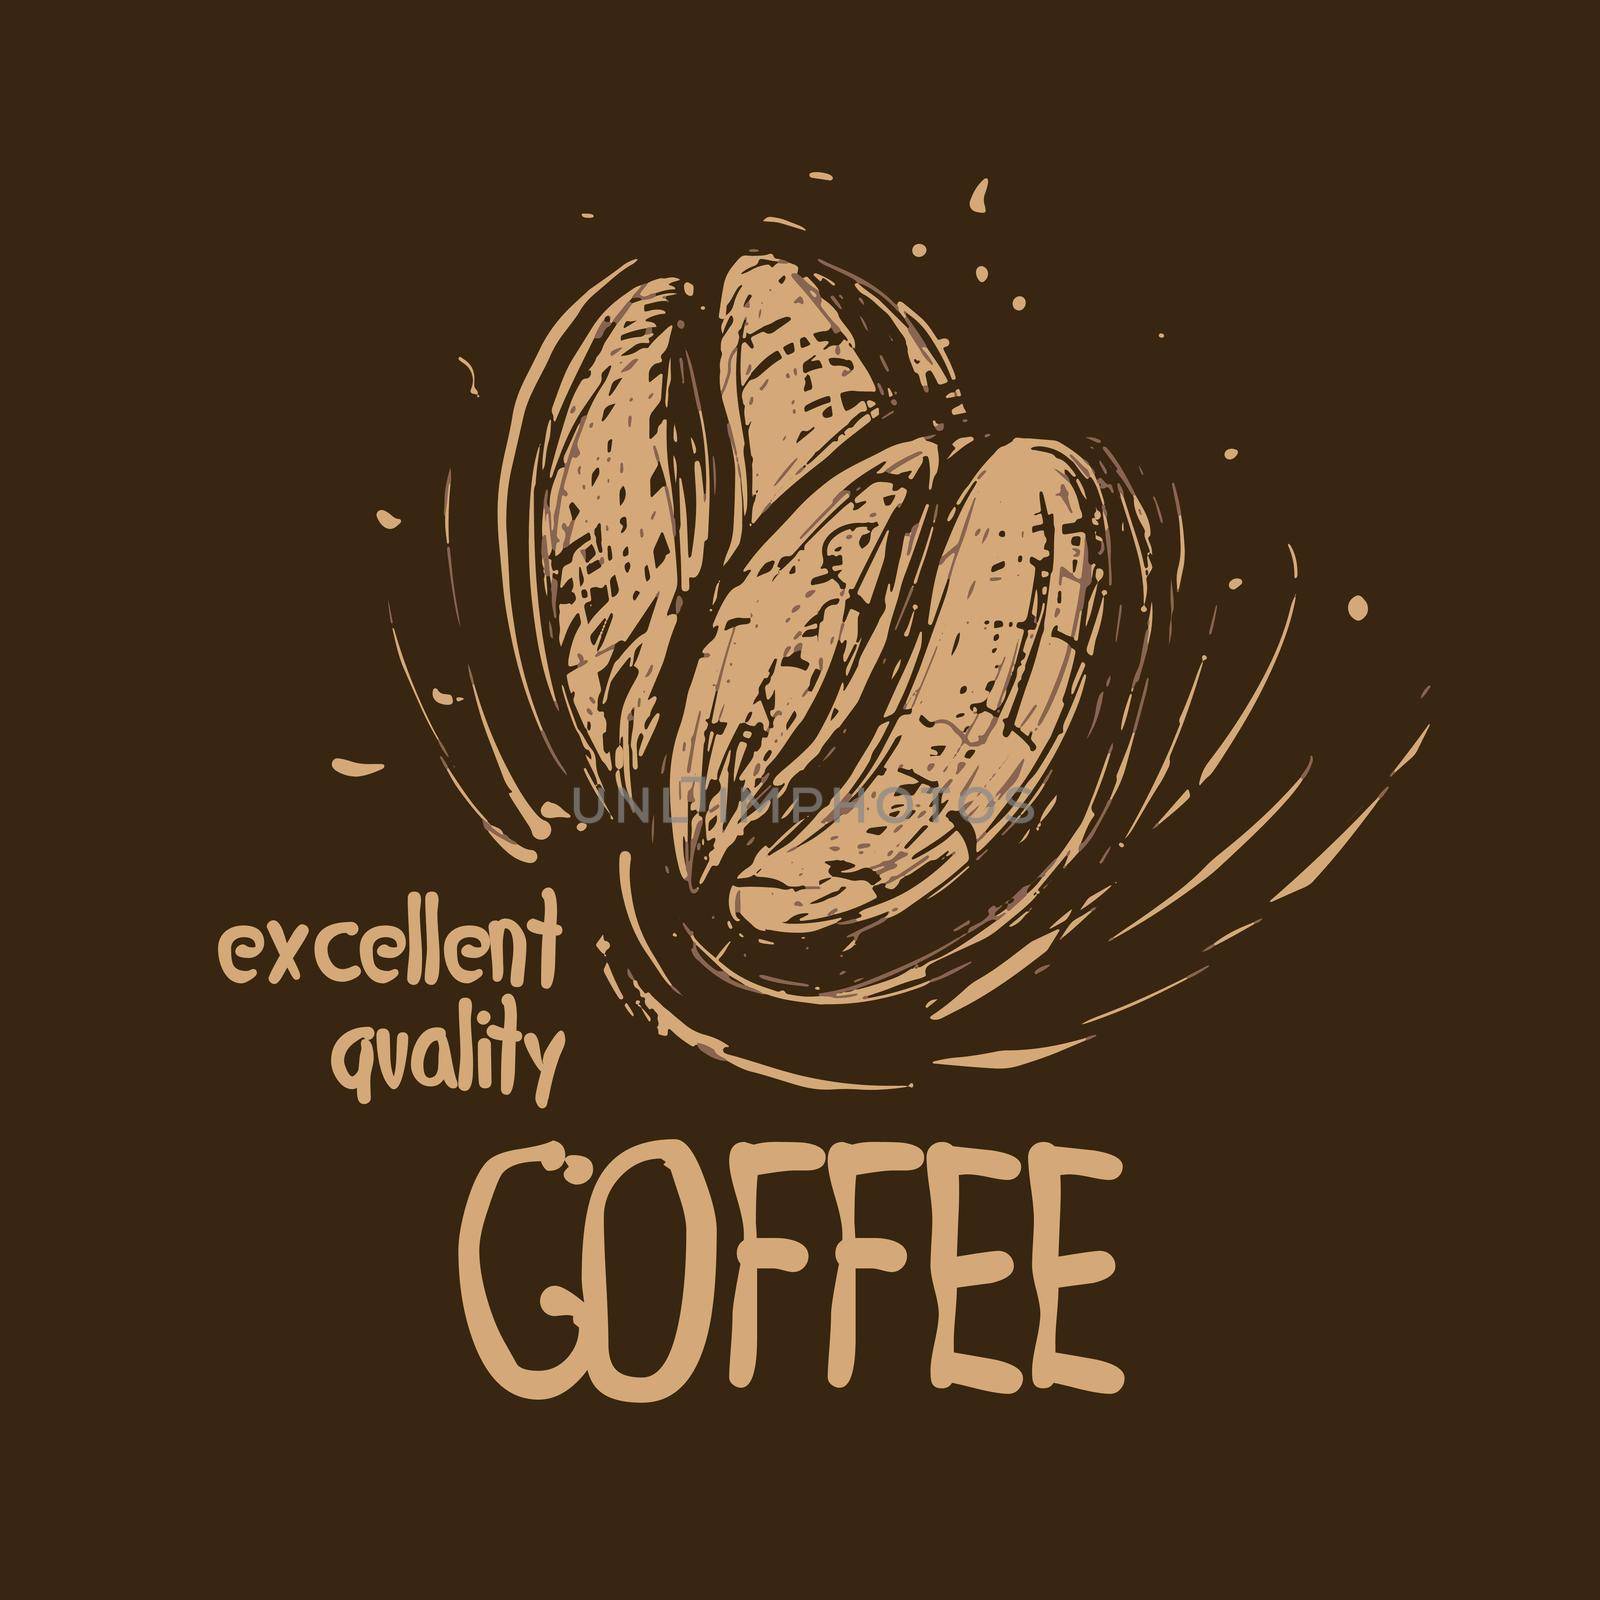 Vector logo with coffee beans drawn on a dark background.